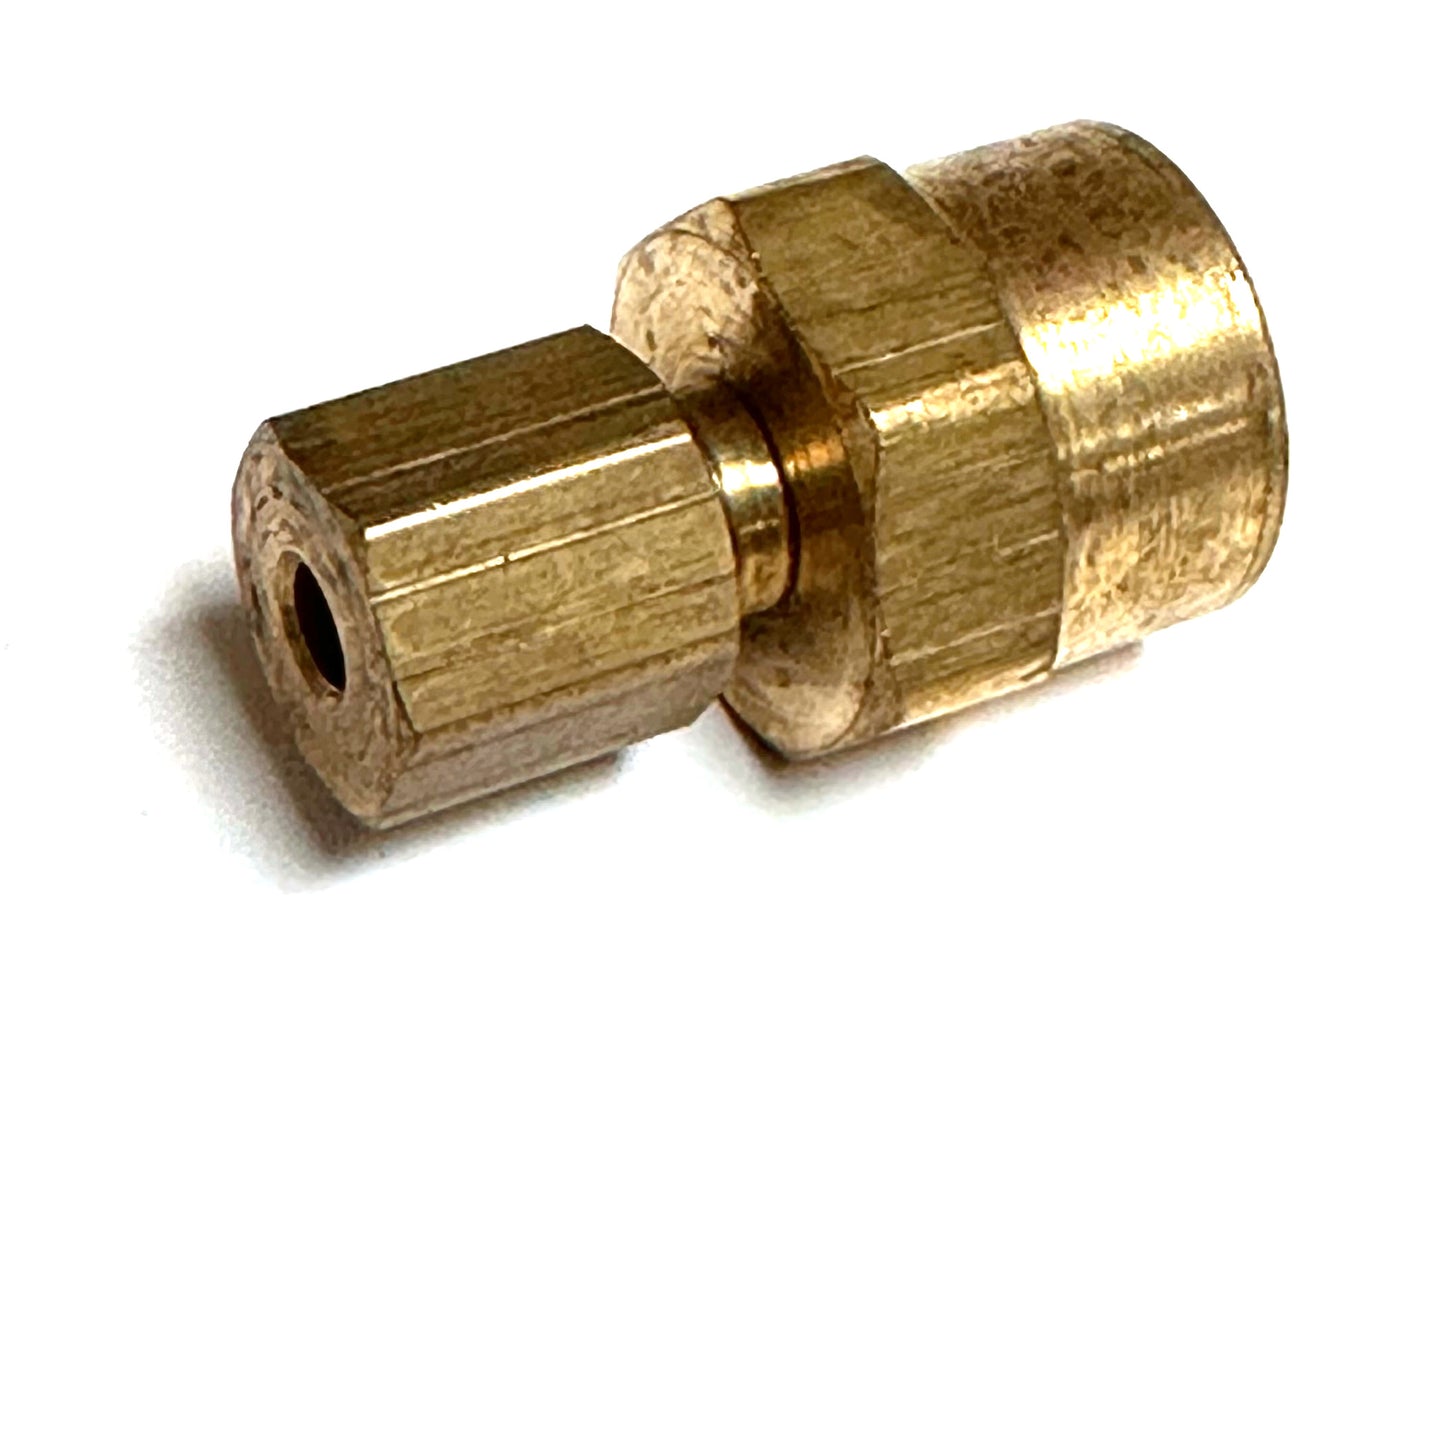 Compression Fitting for Mechanical Boost Gauges that use 1/8 OD nylon –